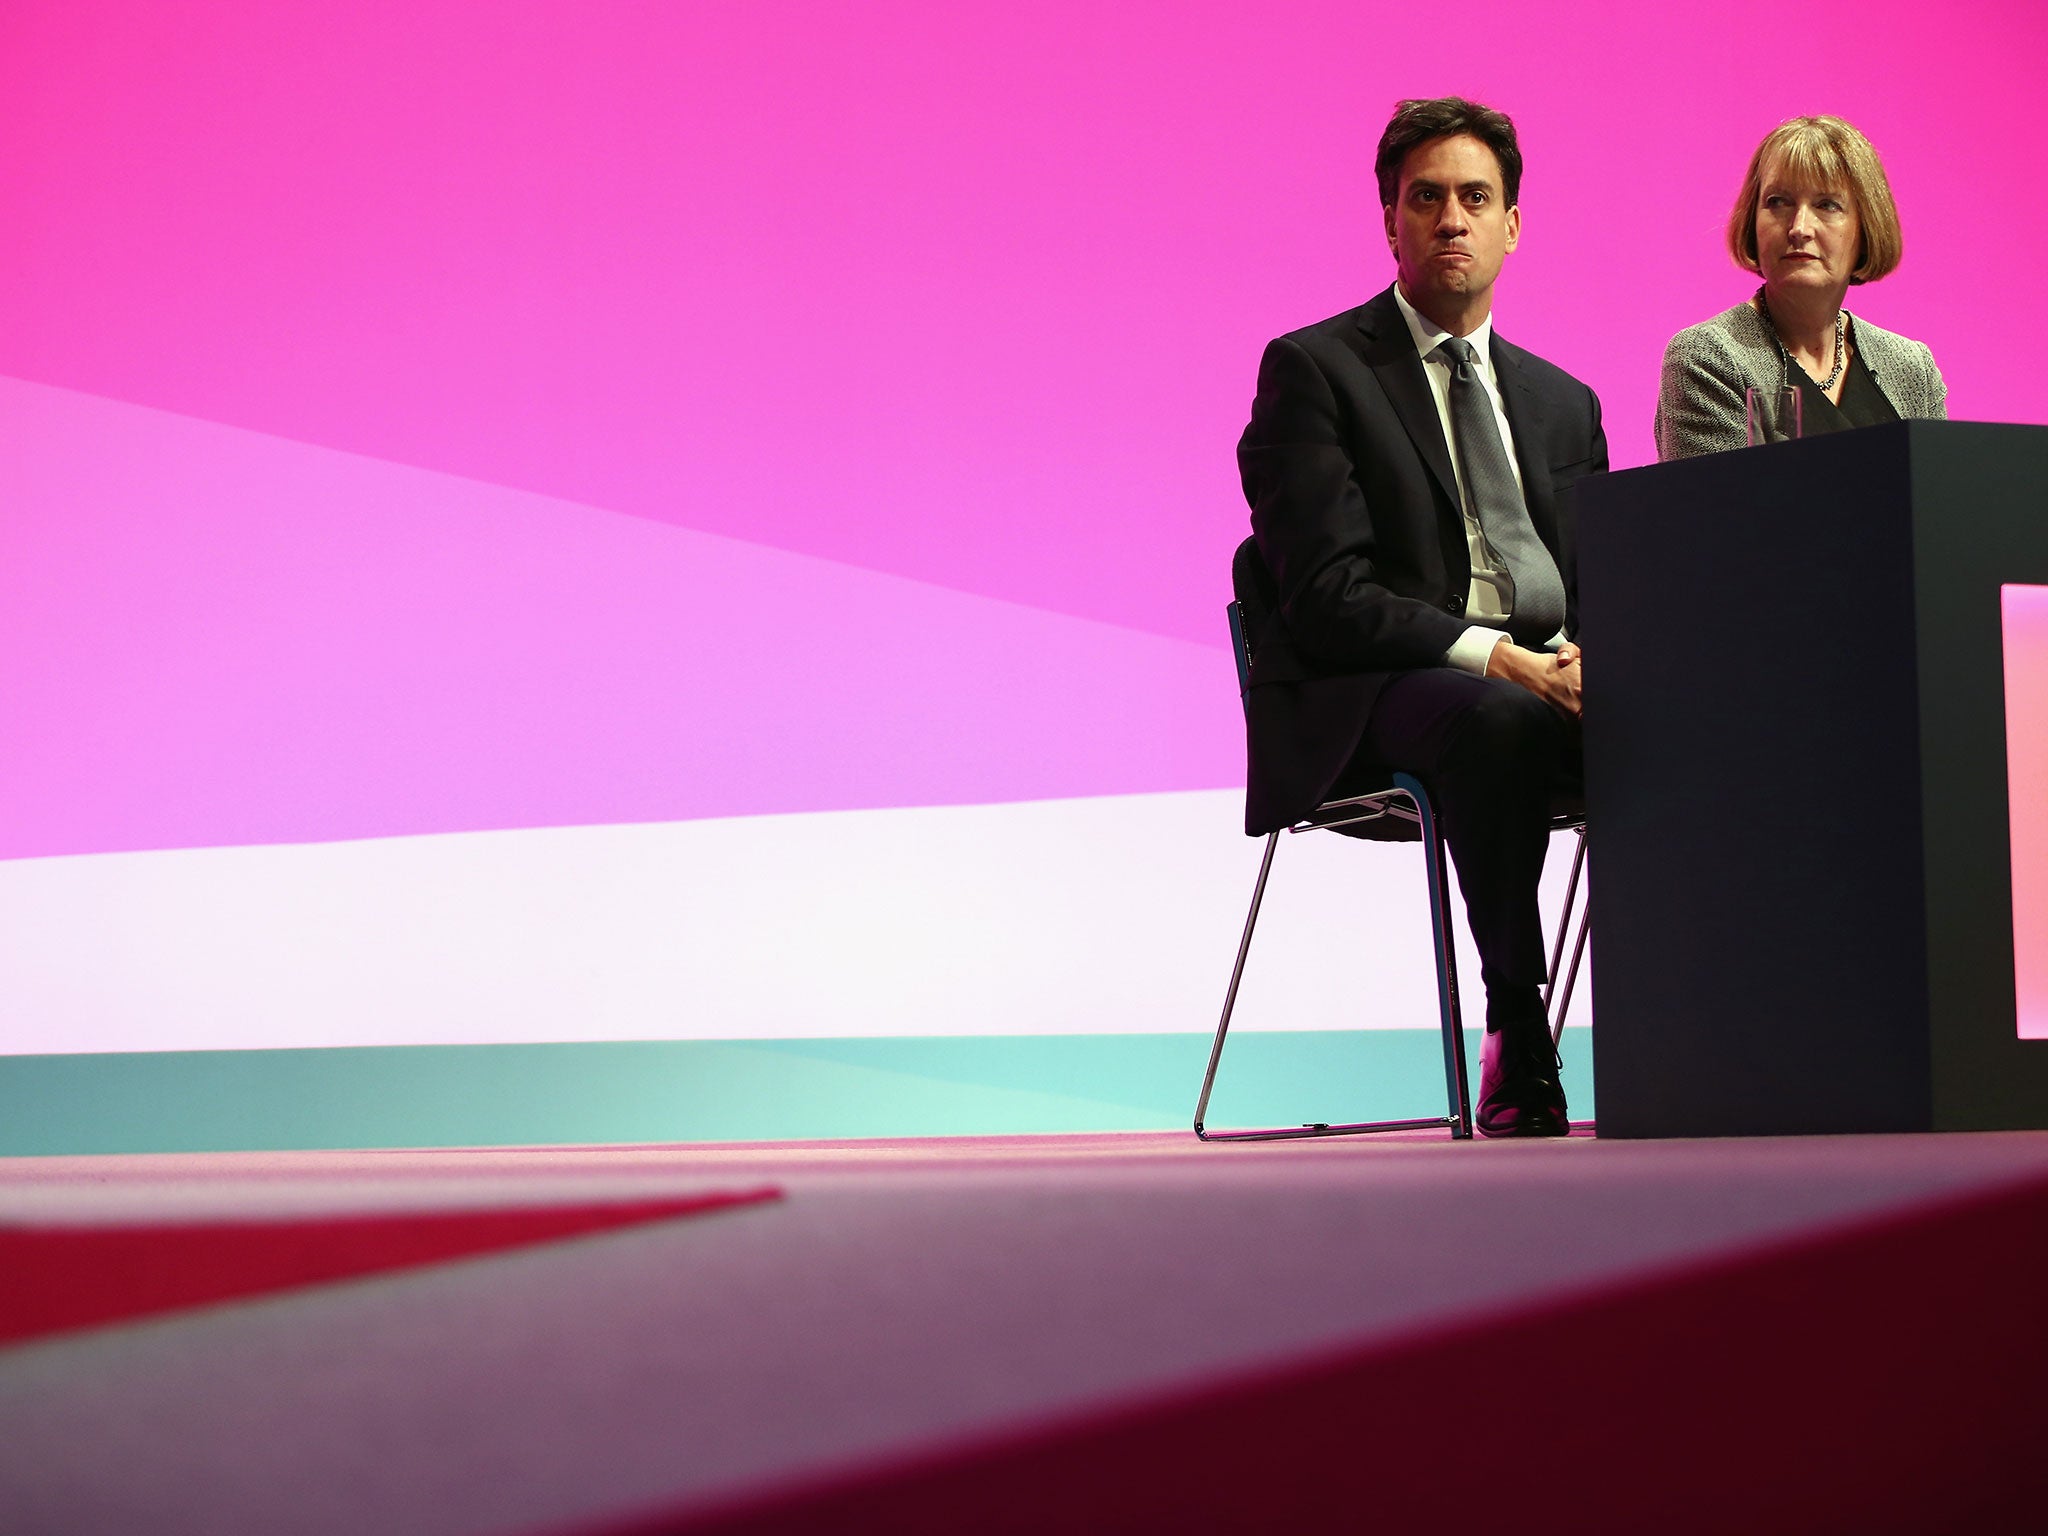 Ed Miliband and his deputy Harriet Harman at the Labour Party conference in Manchester